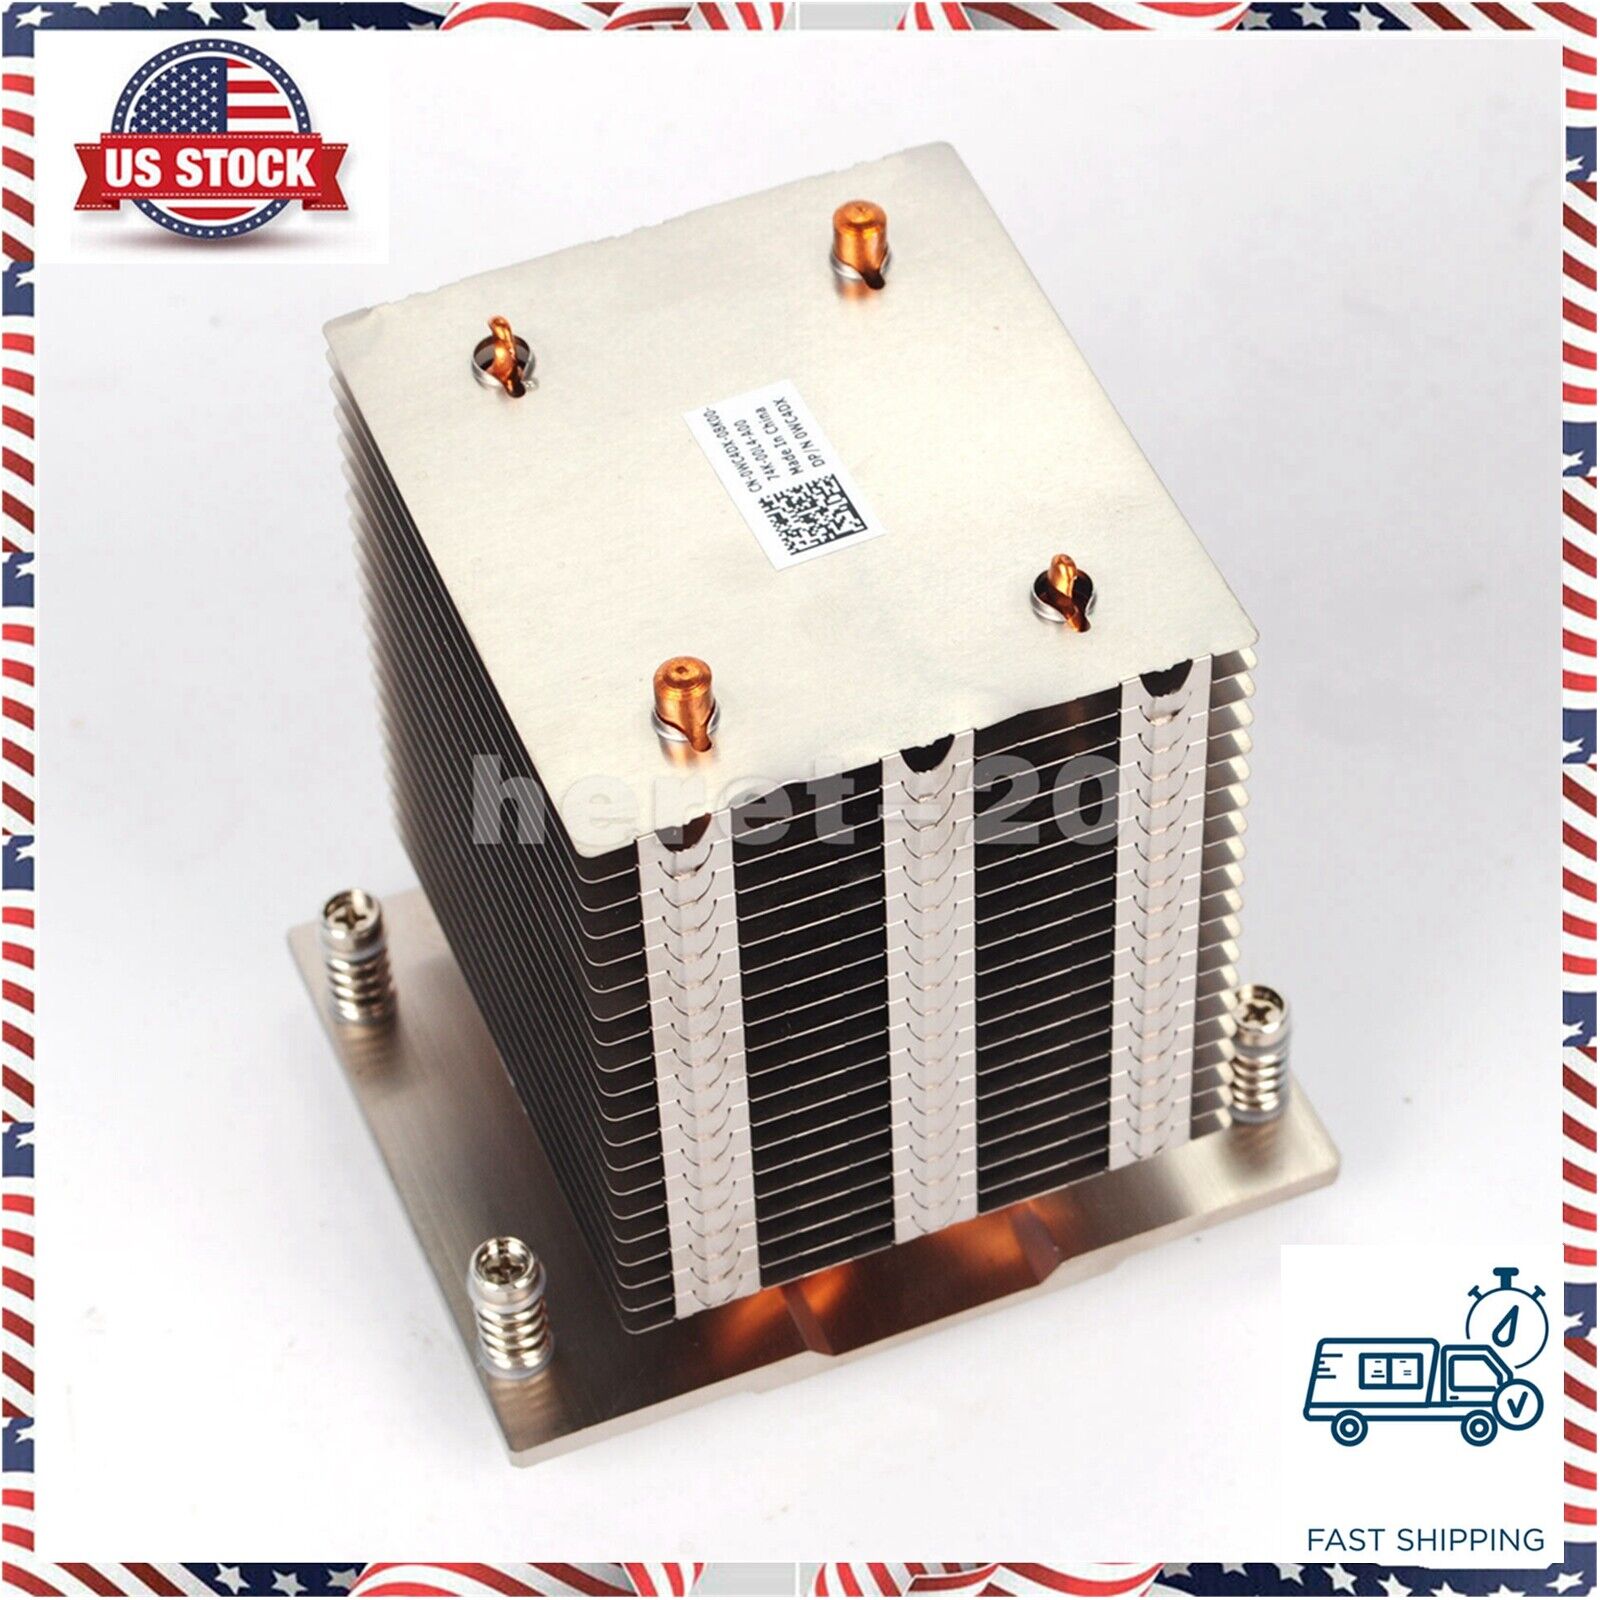 New CPU Cooling Heatsink for DELL PowerEdge Tower Server T430 WC4DX 0WC4DX US